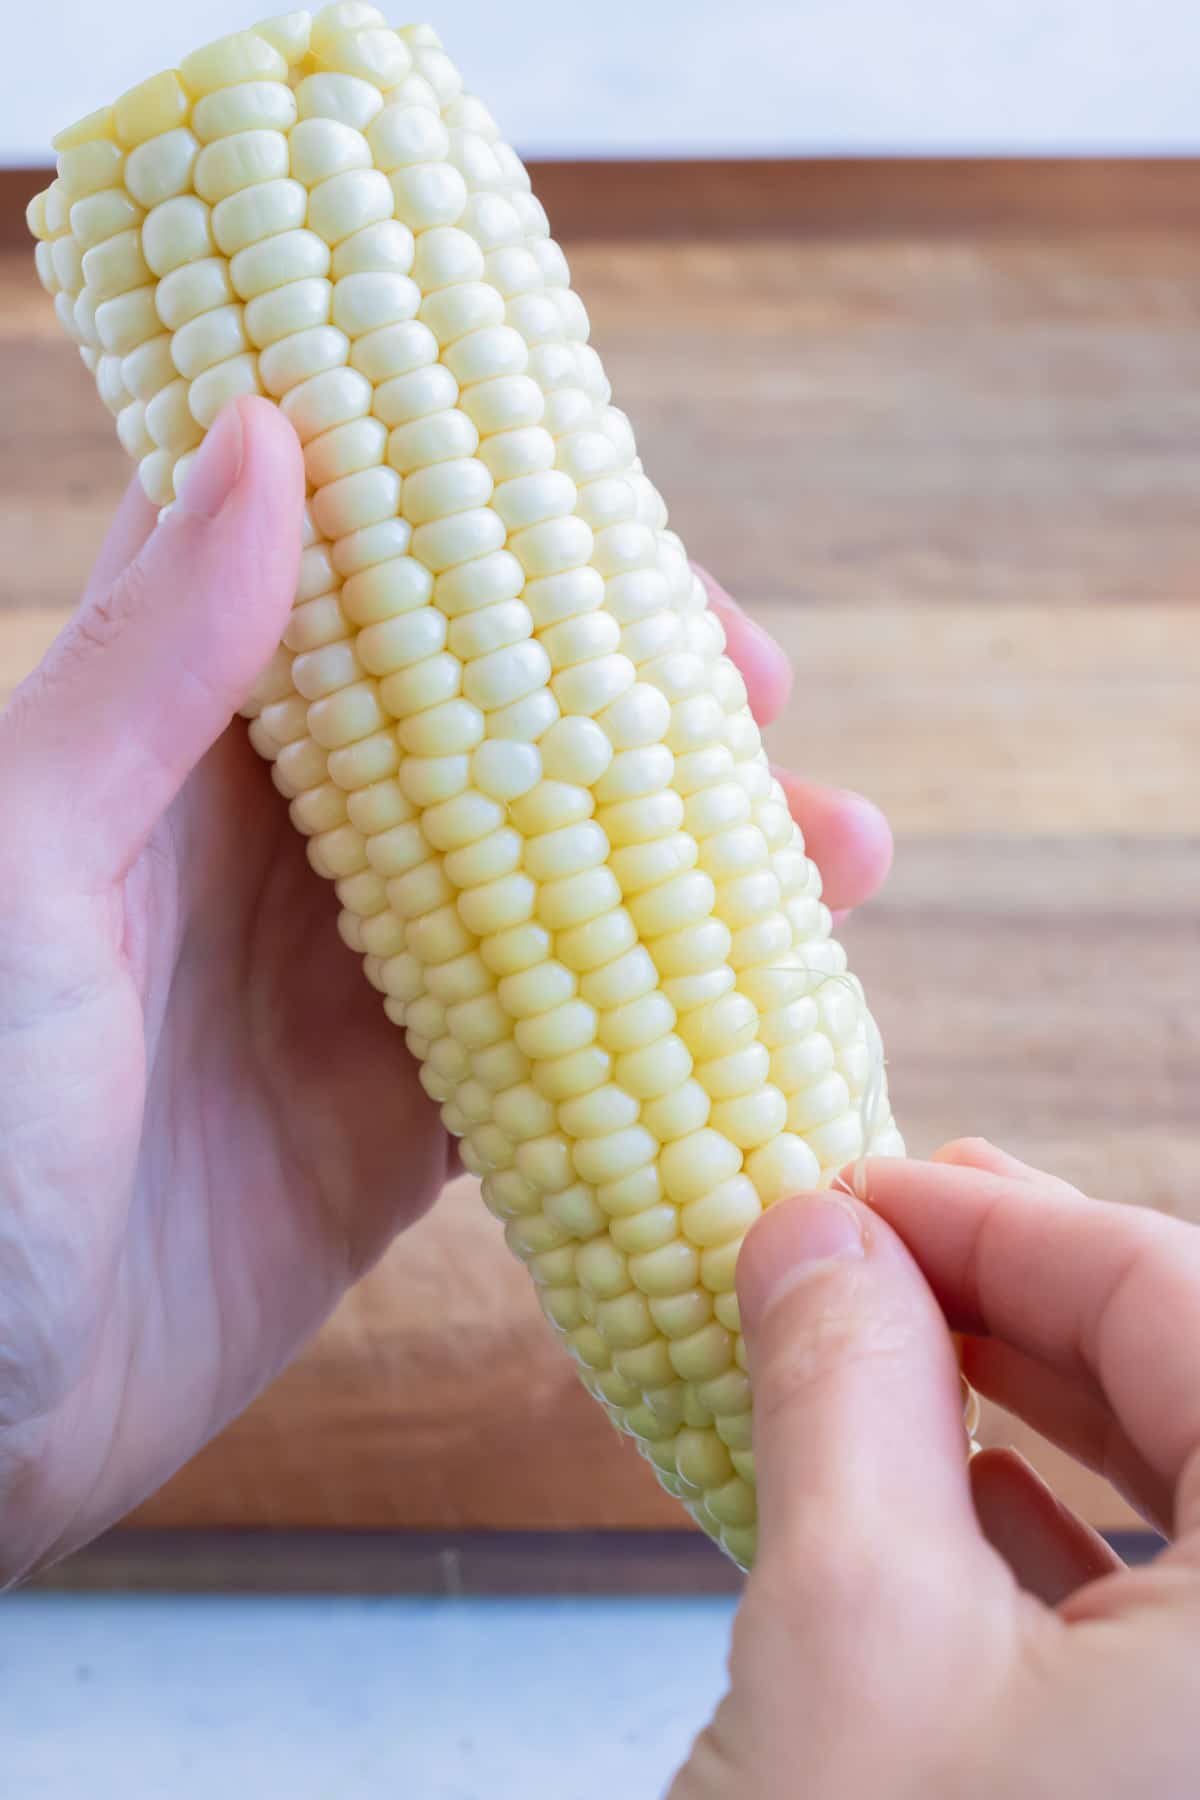 Remaining silk strands are removed from the corn.